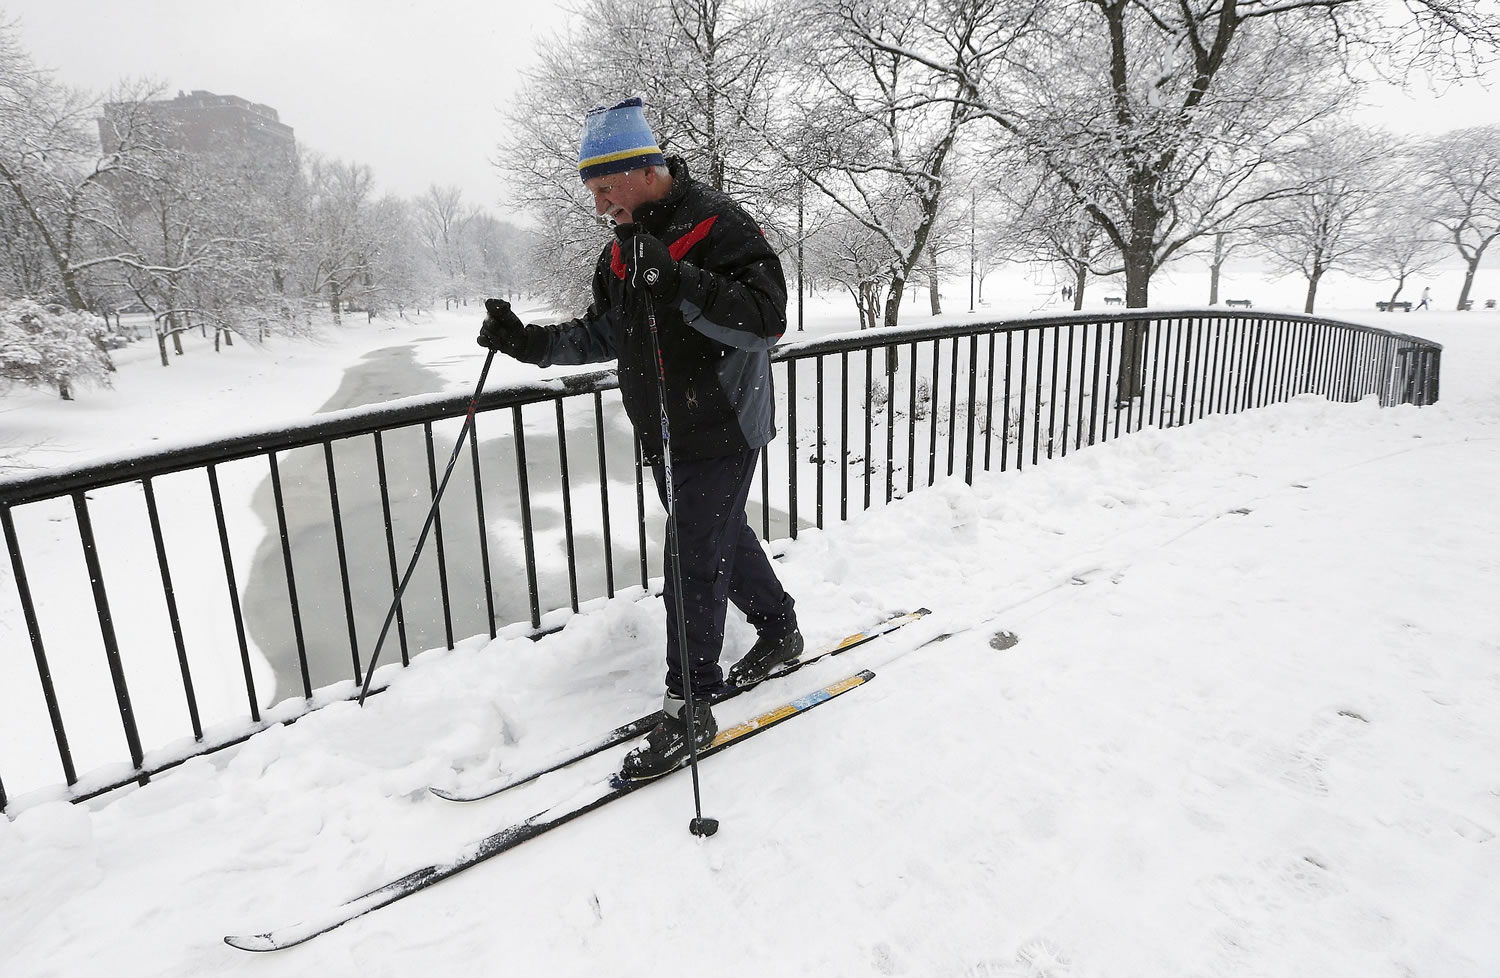 Irv Rosenberg, of Boston, uses cross country skis Saturday in the Esplanade in Boston. A winter storm warning covering Boston and Hartford, Connecticut was in effect through 7 p.m.